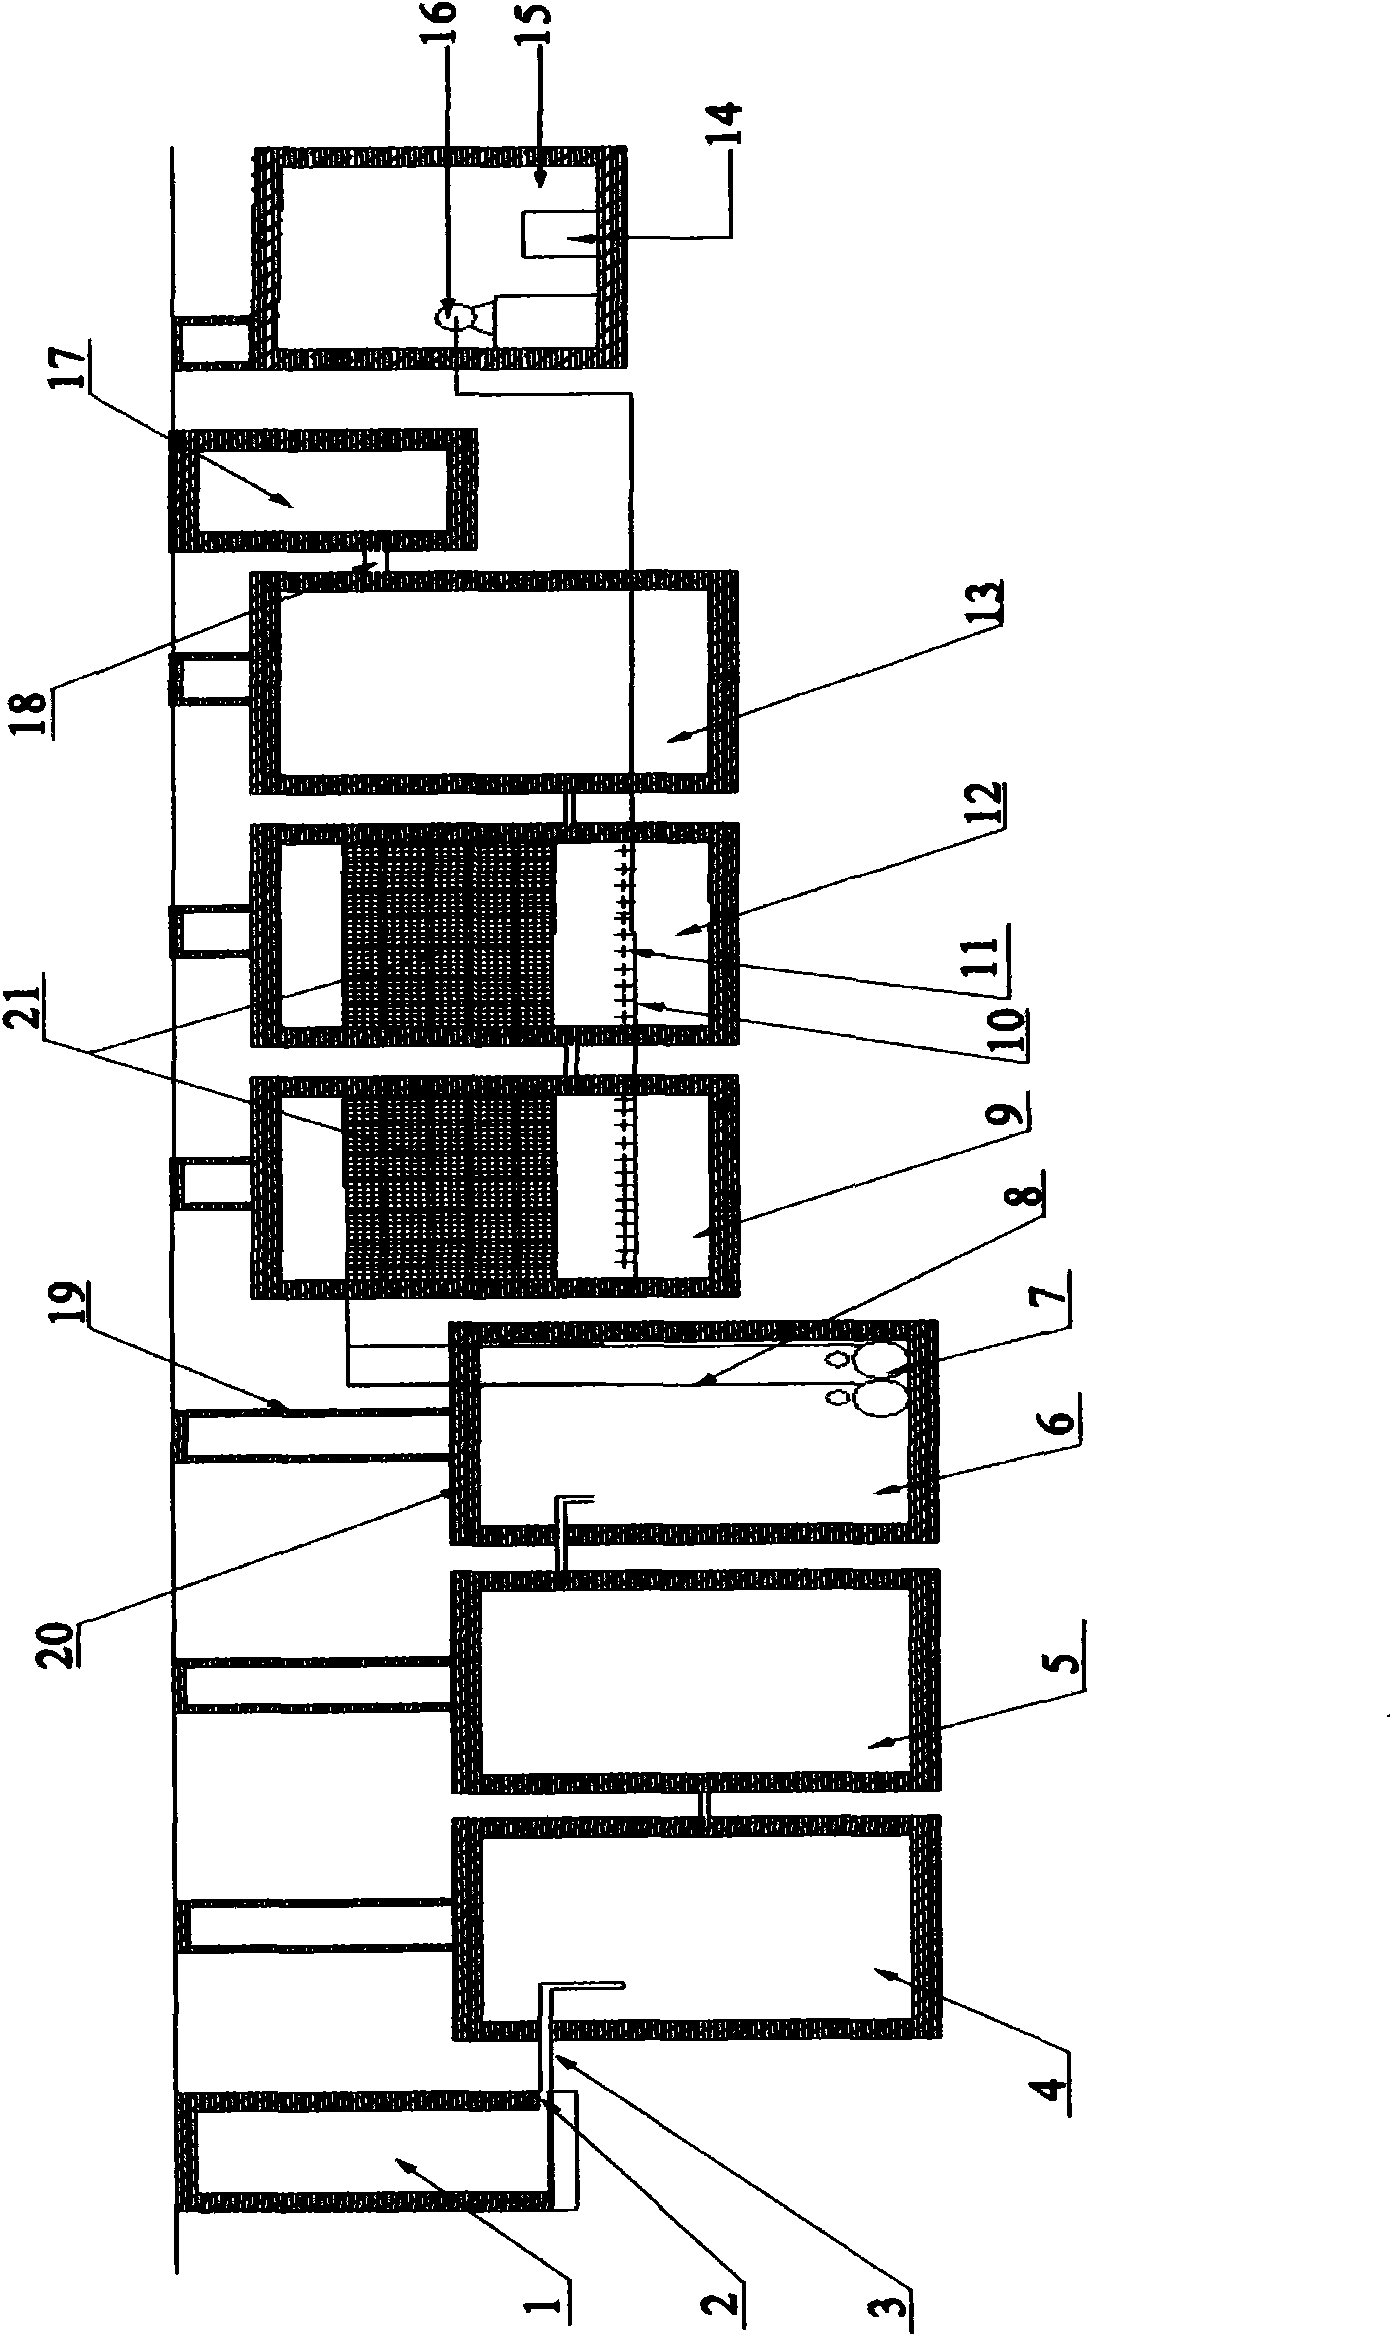 Domestic sewage bioreaction treatment and recycling system